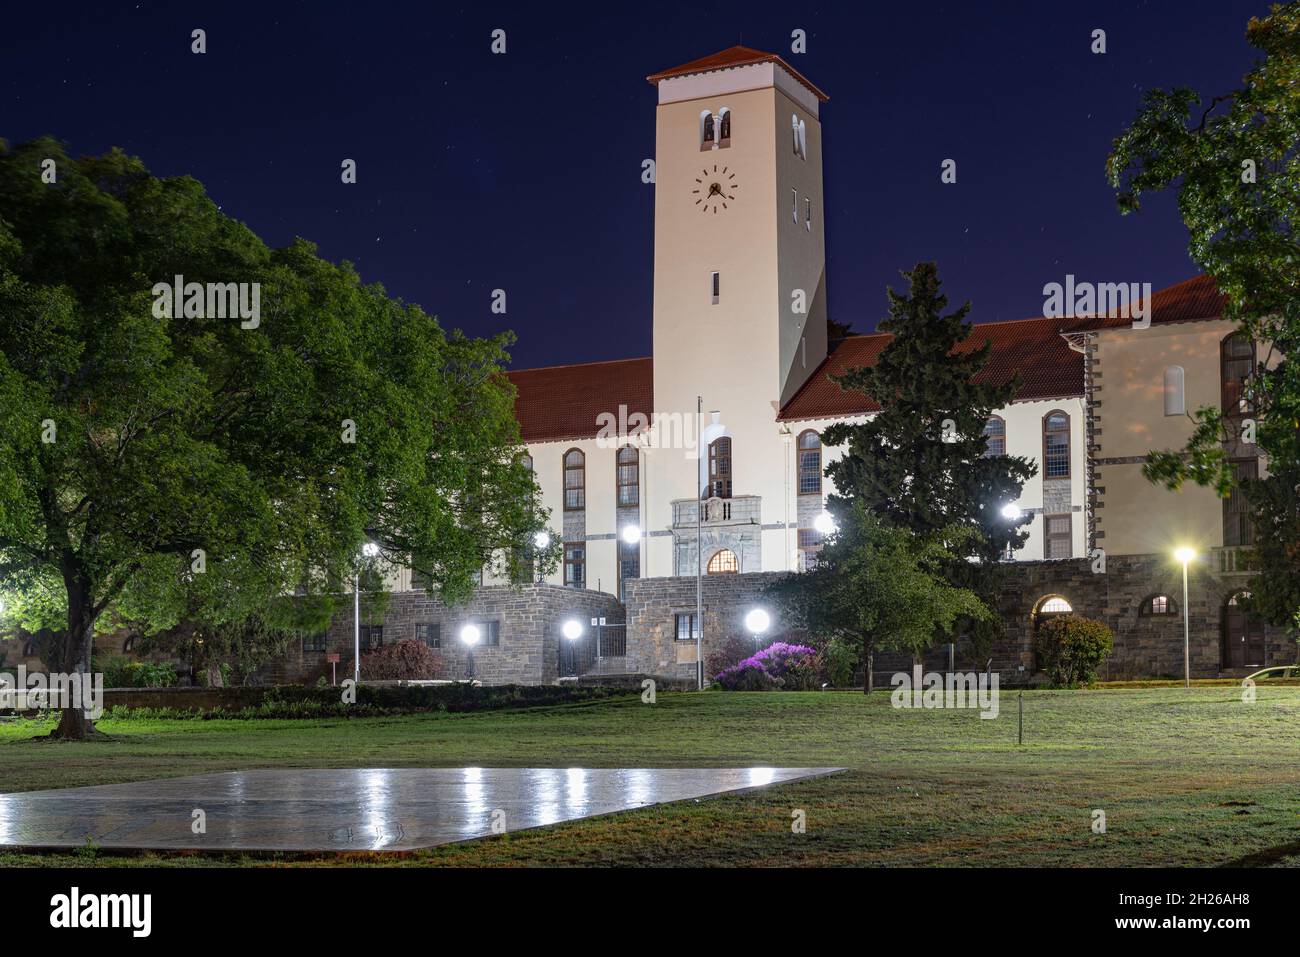 Main administration building and clock tower of Rhodes University designed by Sir Herbert Baker, Grahamstown/Makhanda, South Africa, 19 October 2021. Stock Photo